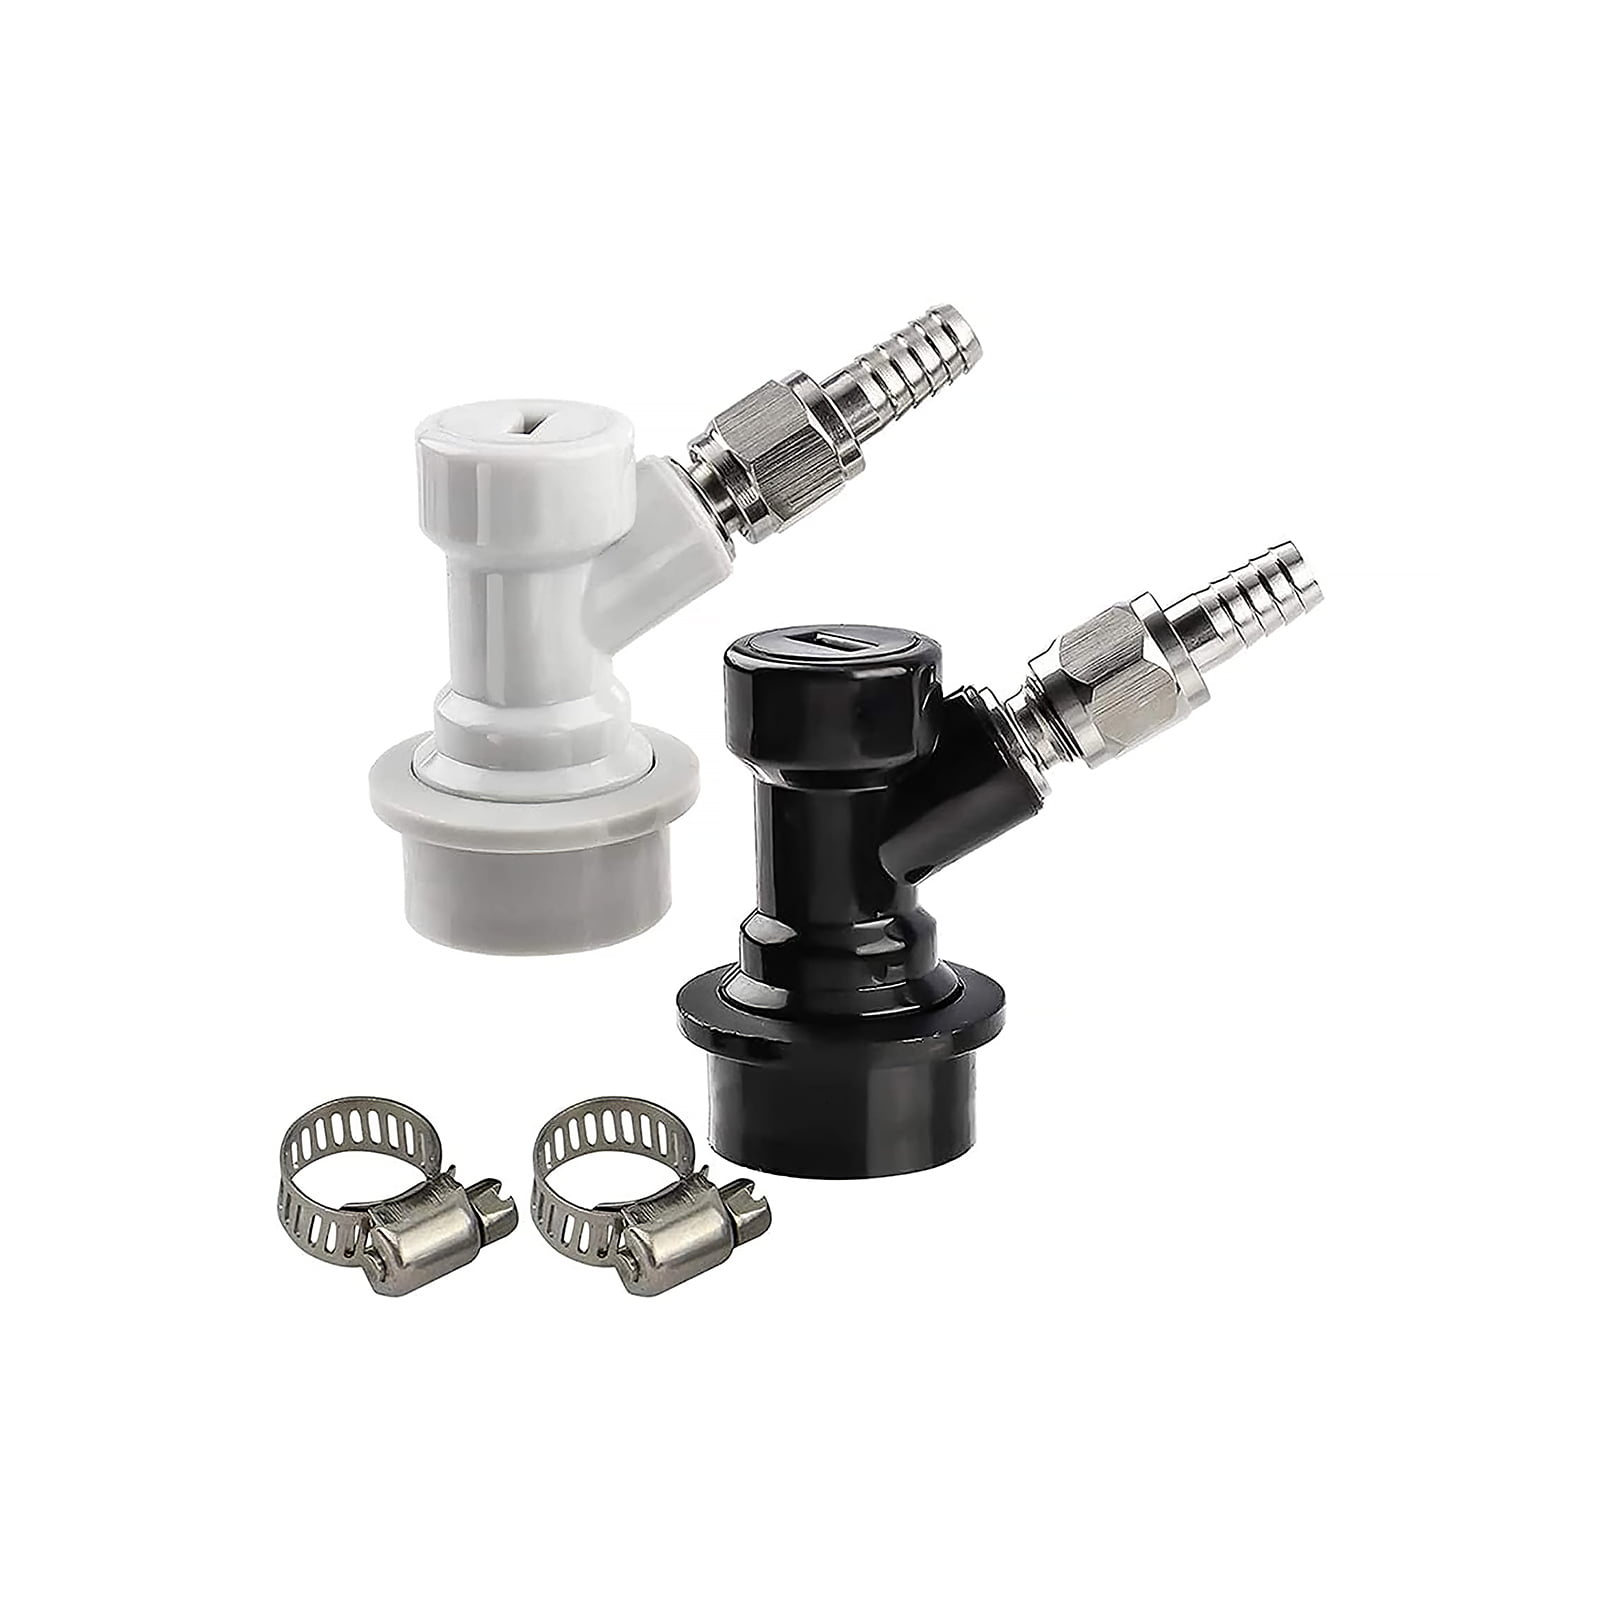 Threaded Ball Lock Keg Fittings Plastic Connector with Adapter Clamp Home Wine